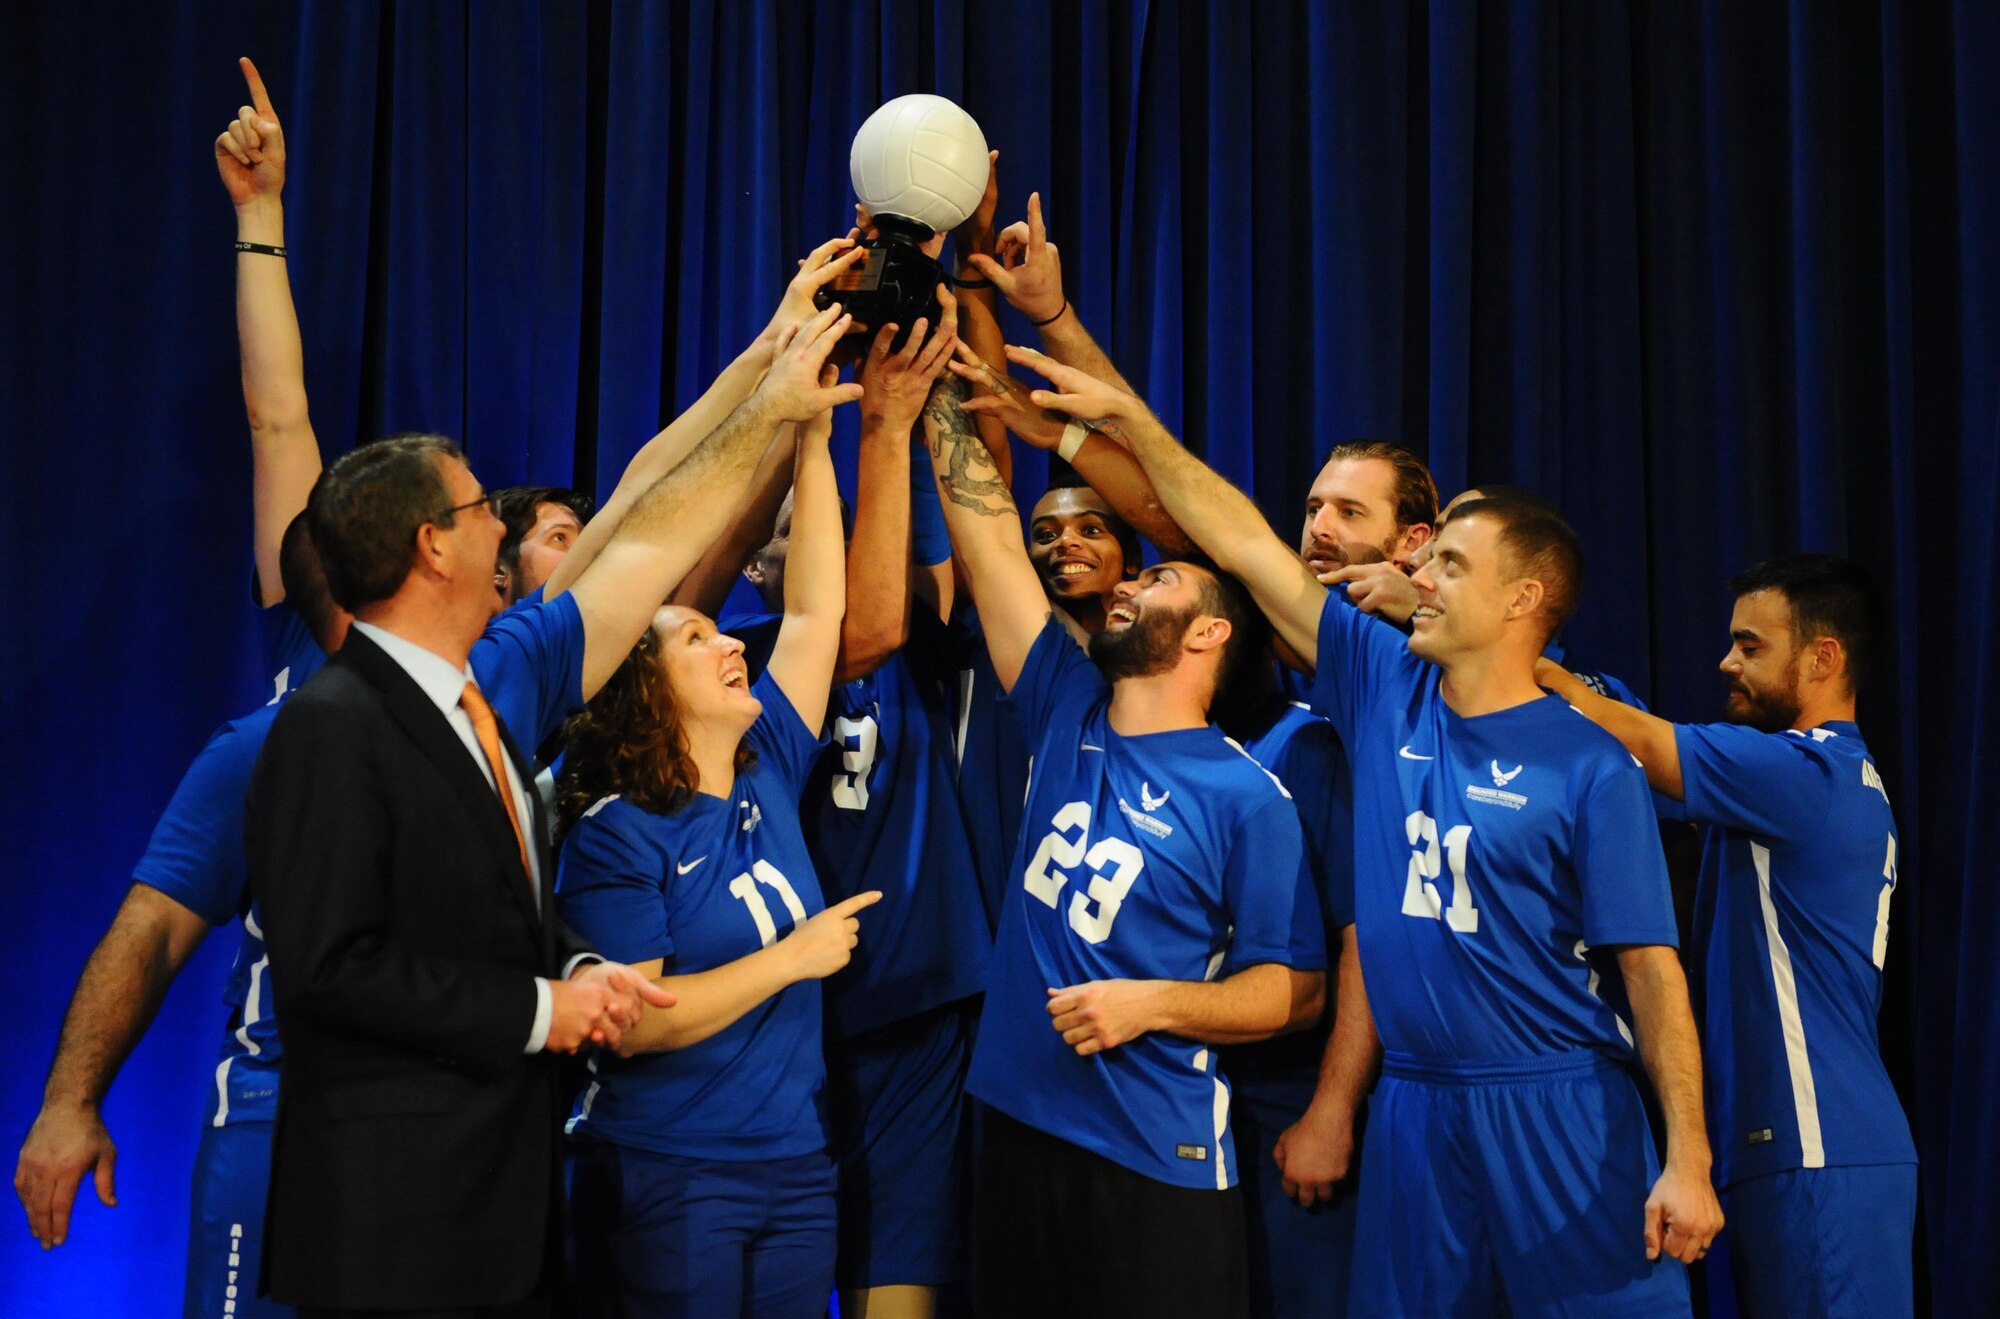 The Air Force Wounded Warrior Team, along with Defense Secretary Ash Carter, raise the coveted 1st place trophy after winning the Warrior Care Month Sitting Volleyball Tournament at the Pentagon in Washington, D.C., Nov. 19, 2015. The Air Force team edged out the Marines in the final match. (U.S. Air Force photo/Senior Airman Hailey Haux)  